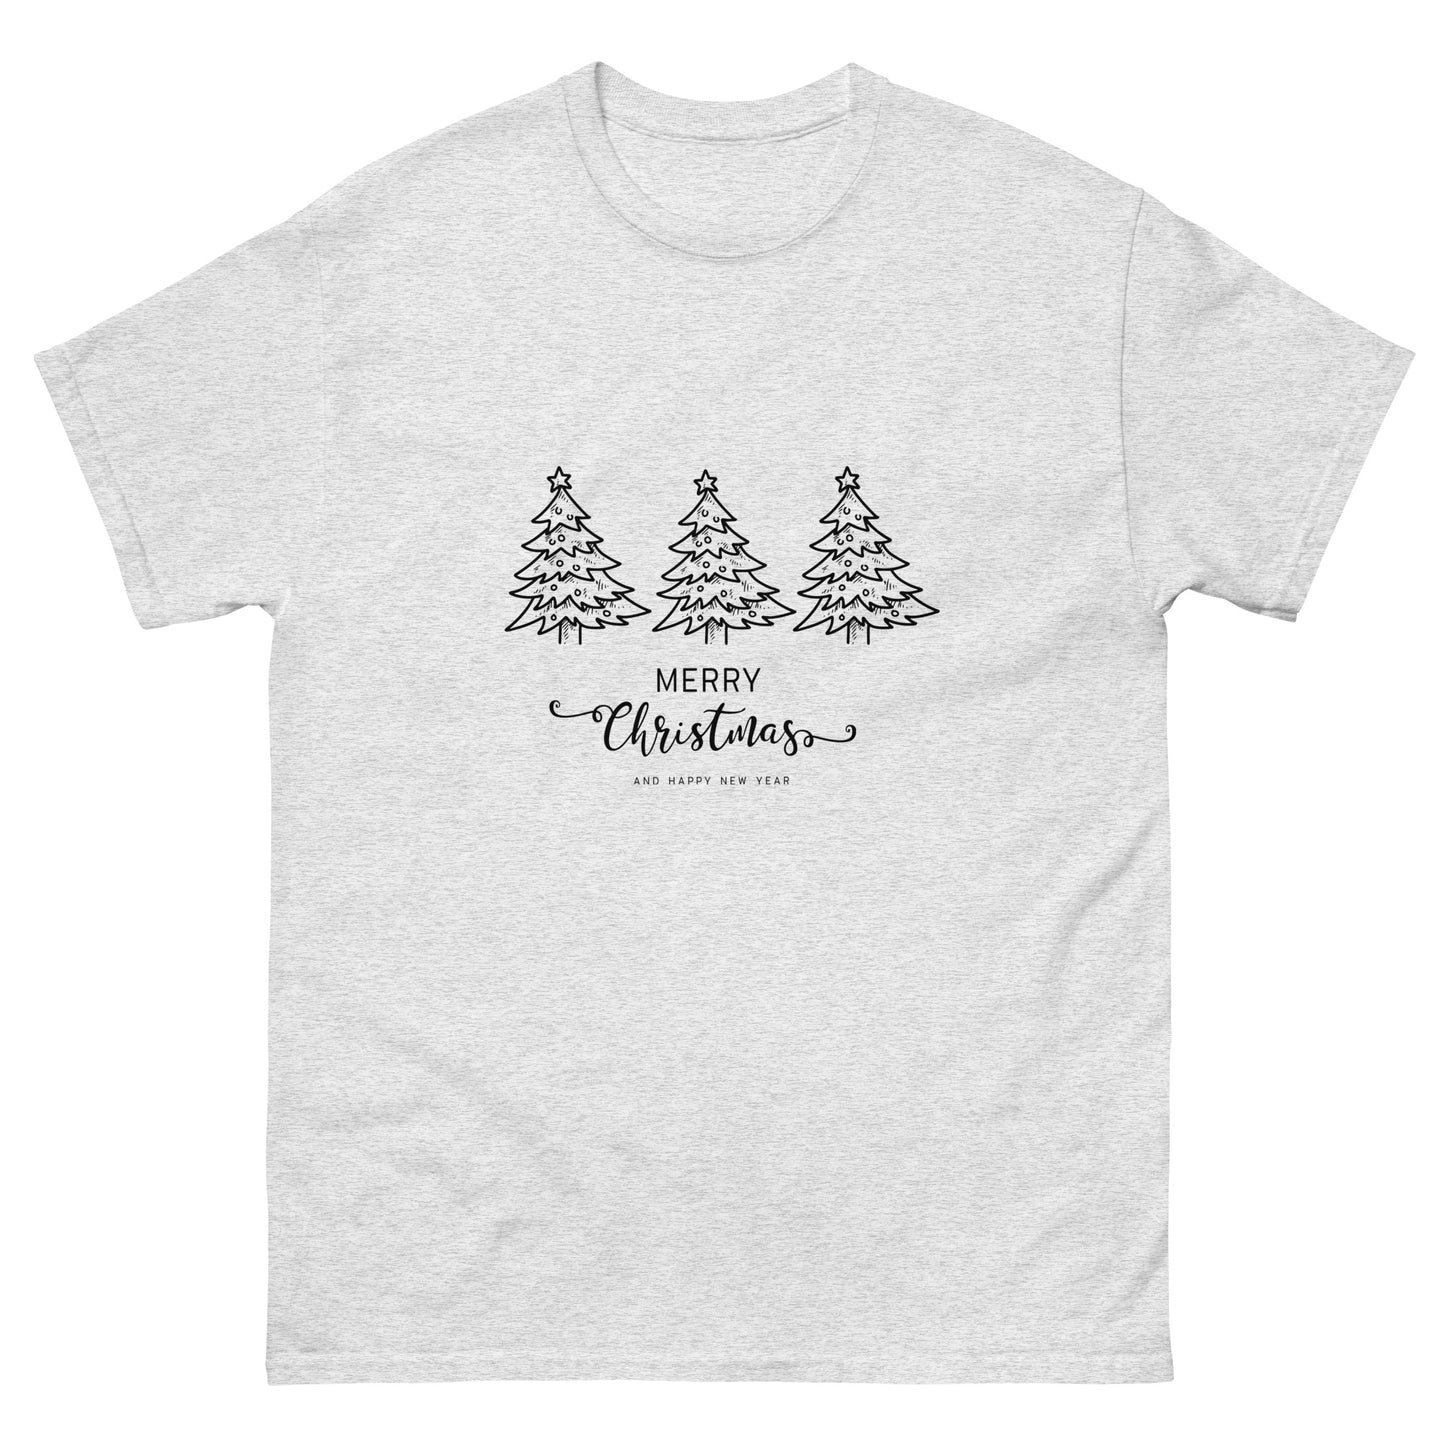 Classic tee | Merry Christmas - Better Outcomes